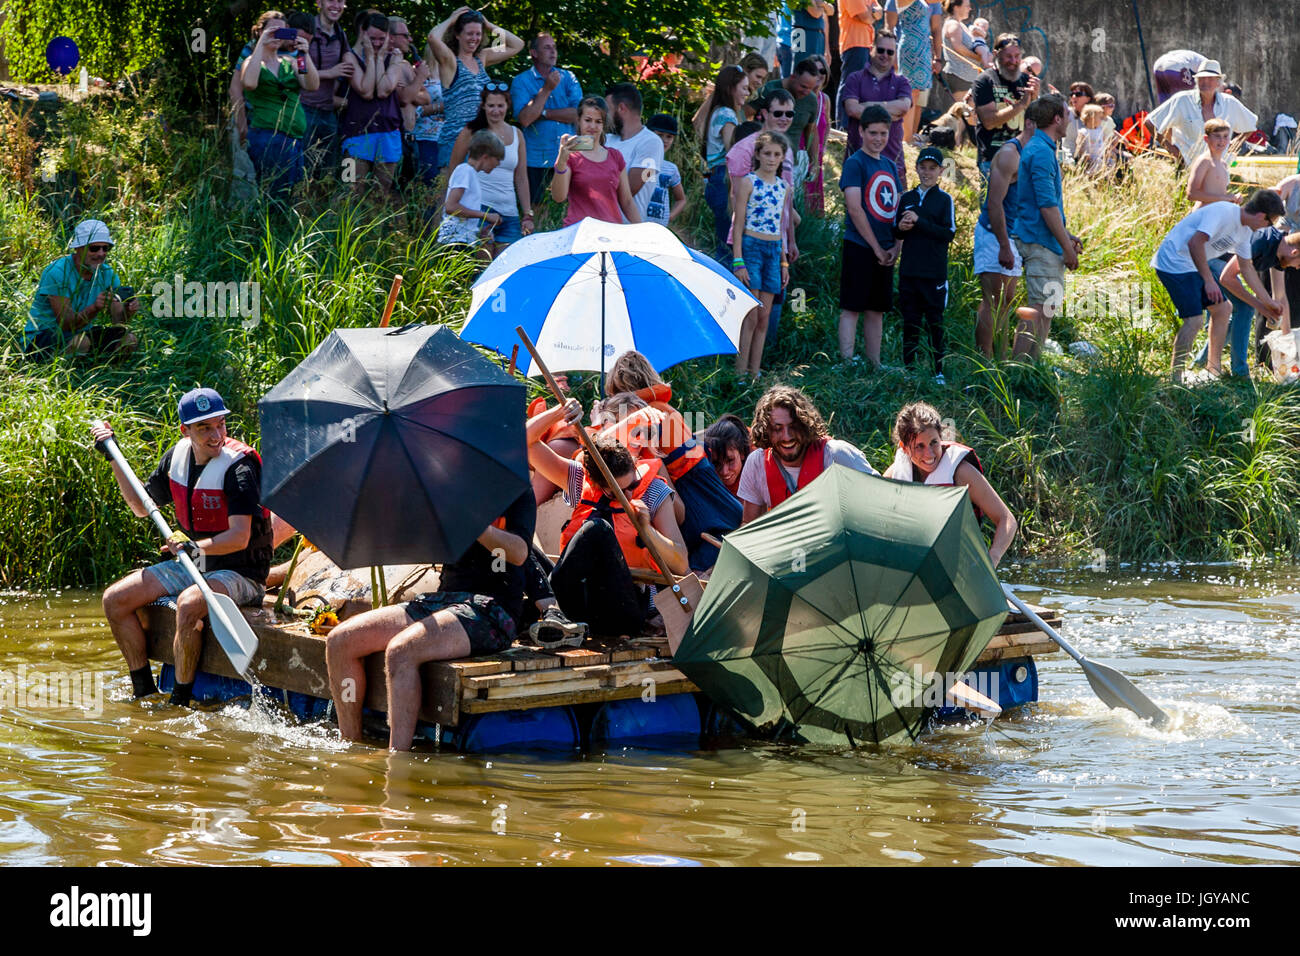 The Annual Lewes Raft Race On The River Ouse. The Participants In Home Made Rafts Are Traditionally Pelted with Eggs and Flour By Onlookers, Lewes, UK Stock Photo